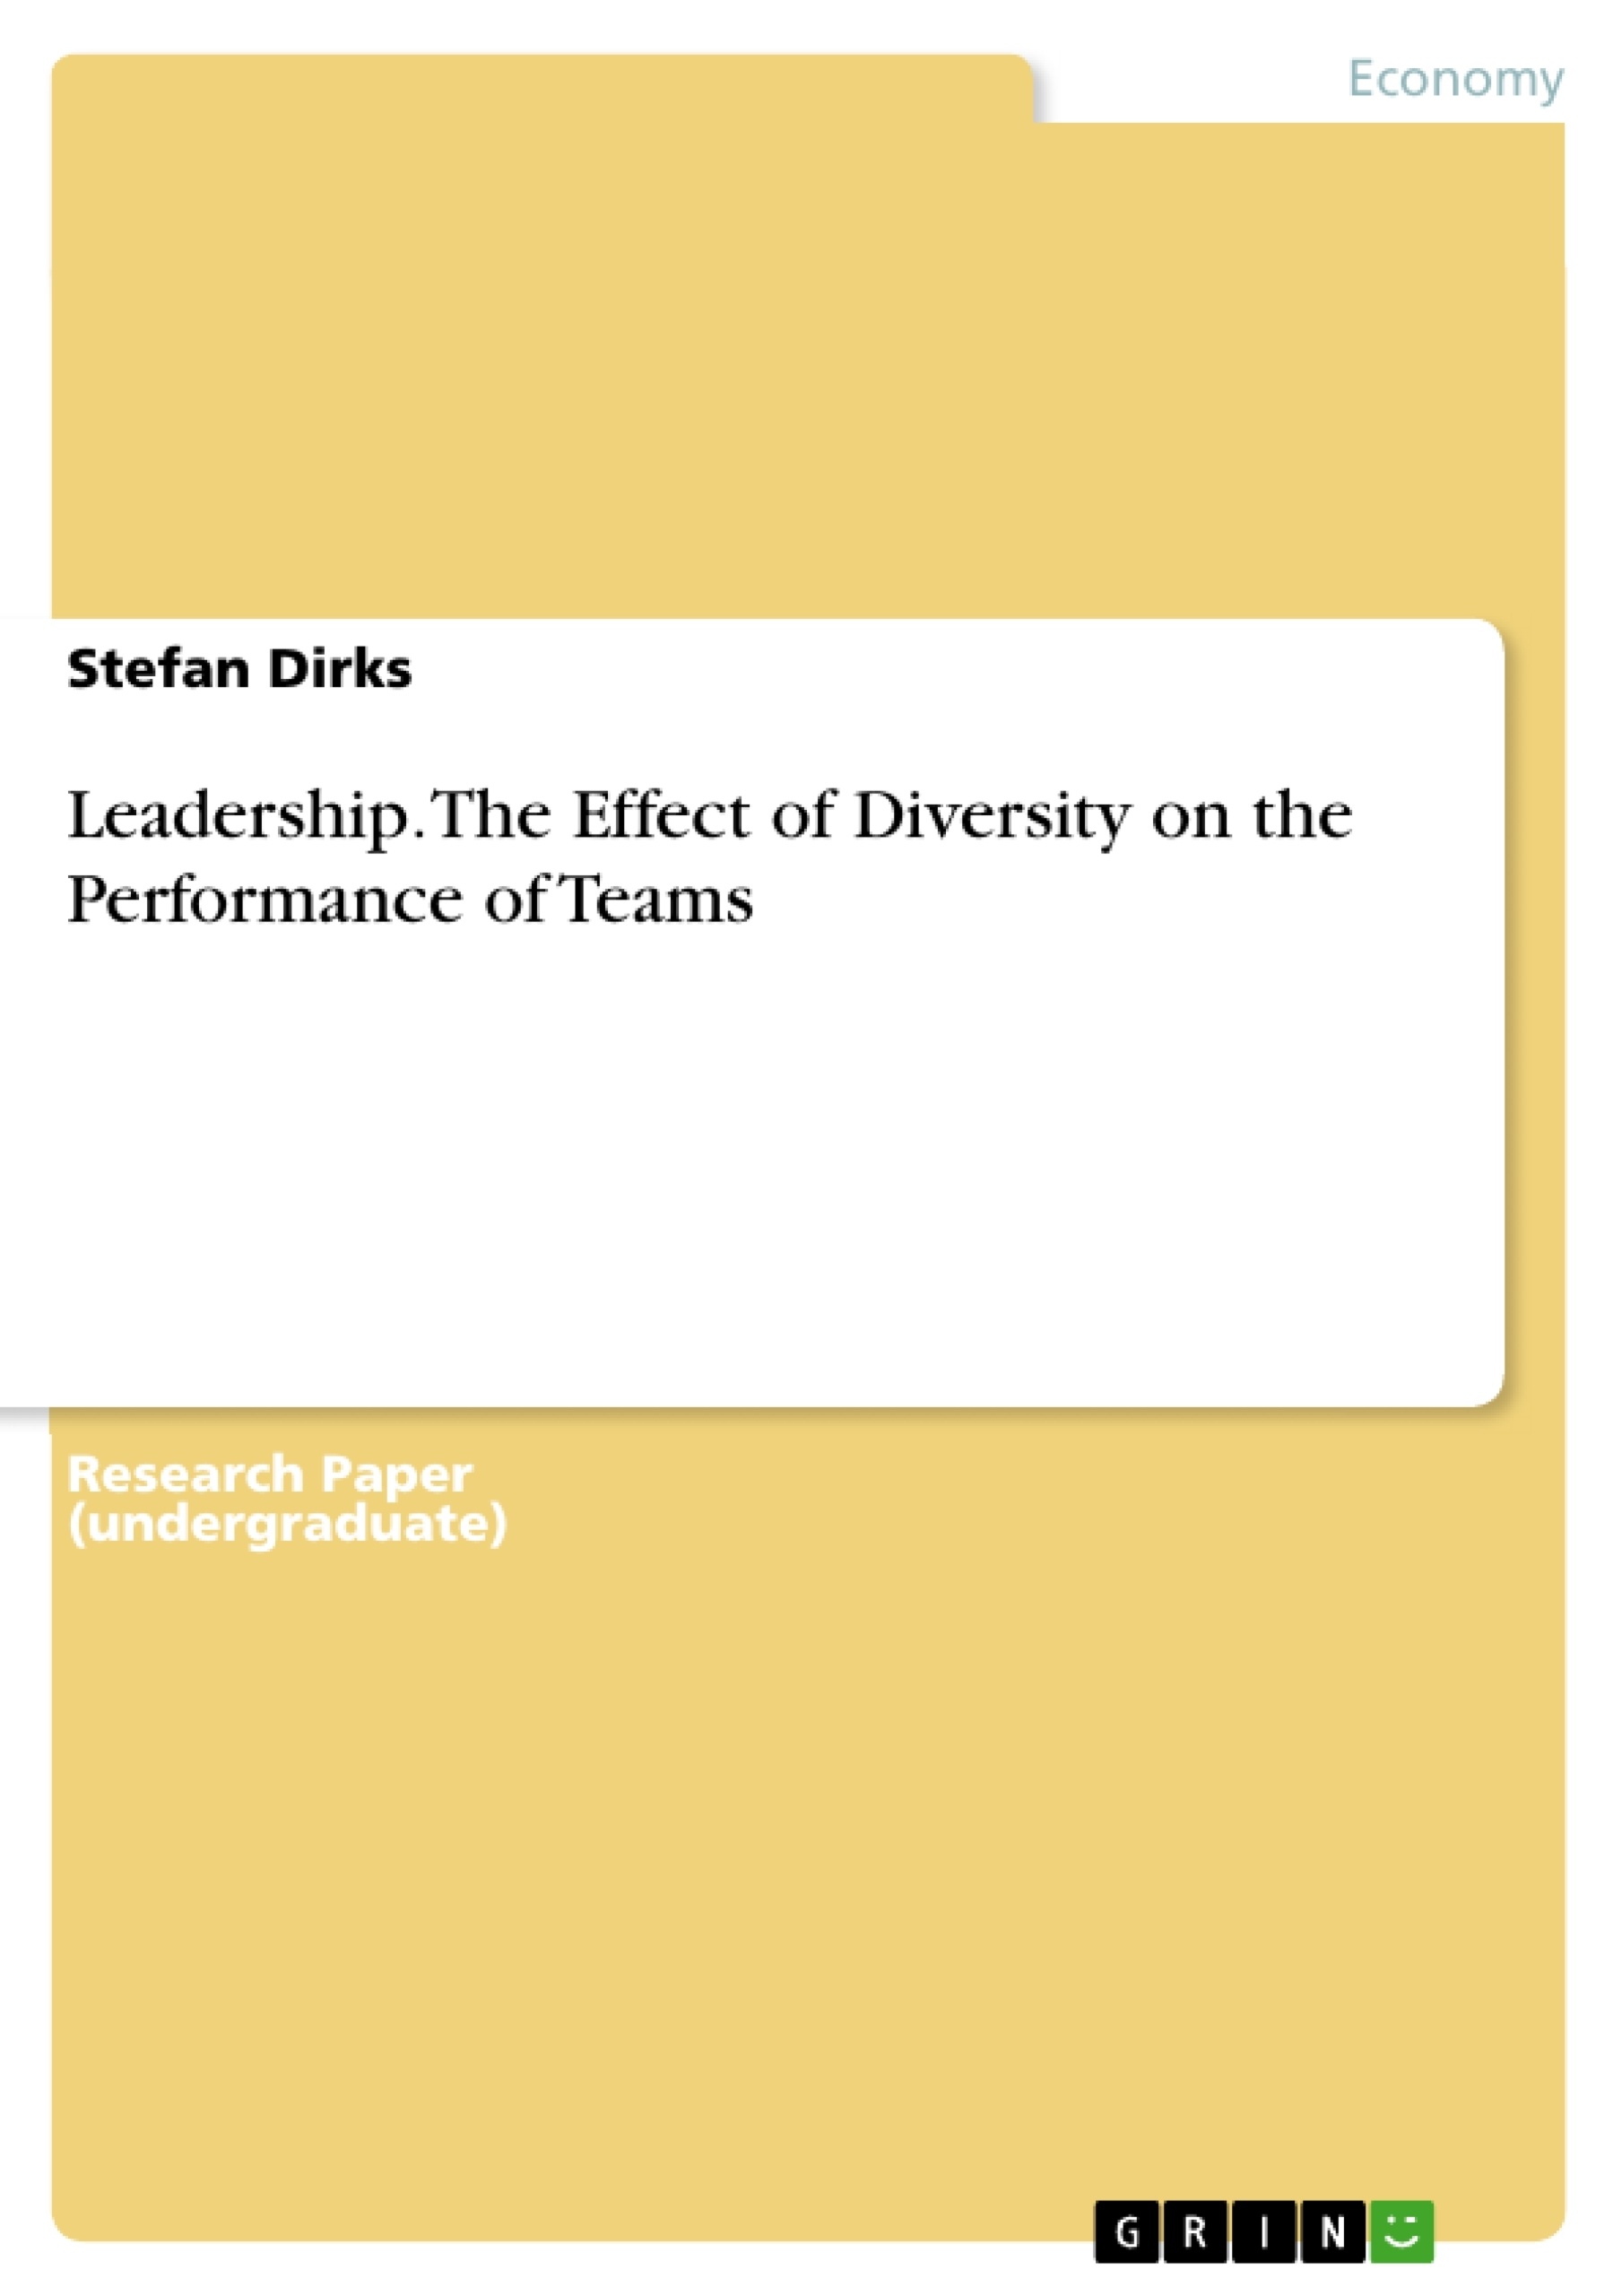 Title: Leadership. The Effect of Diversity on the Performance of Teams